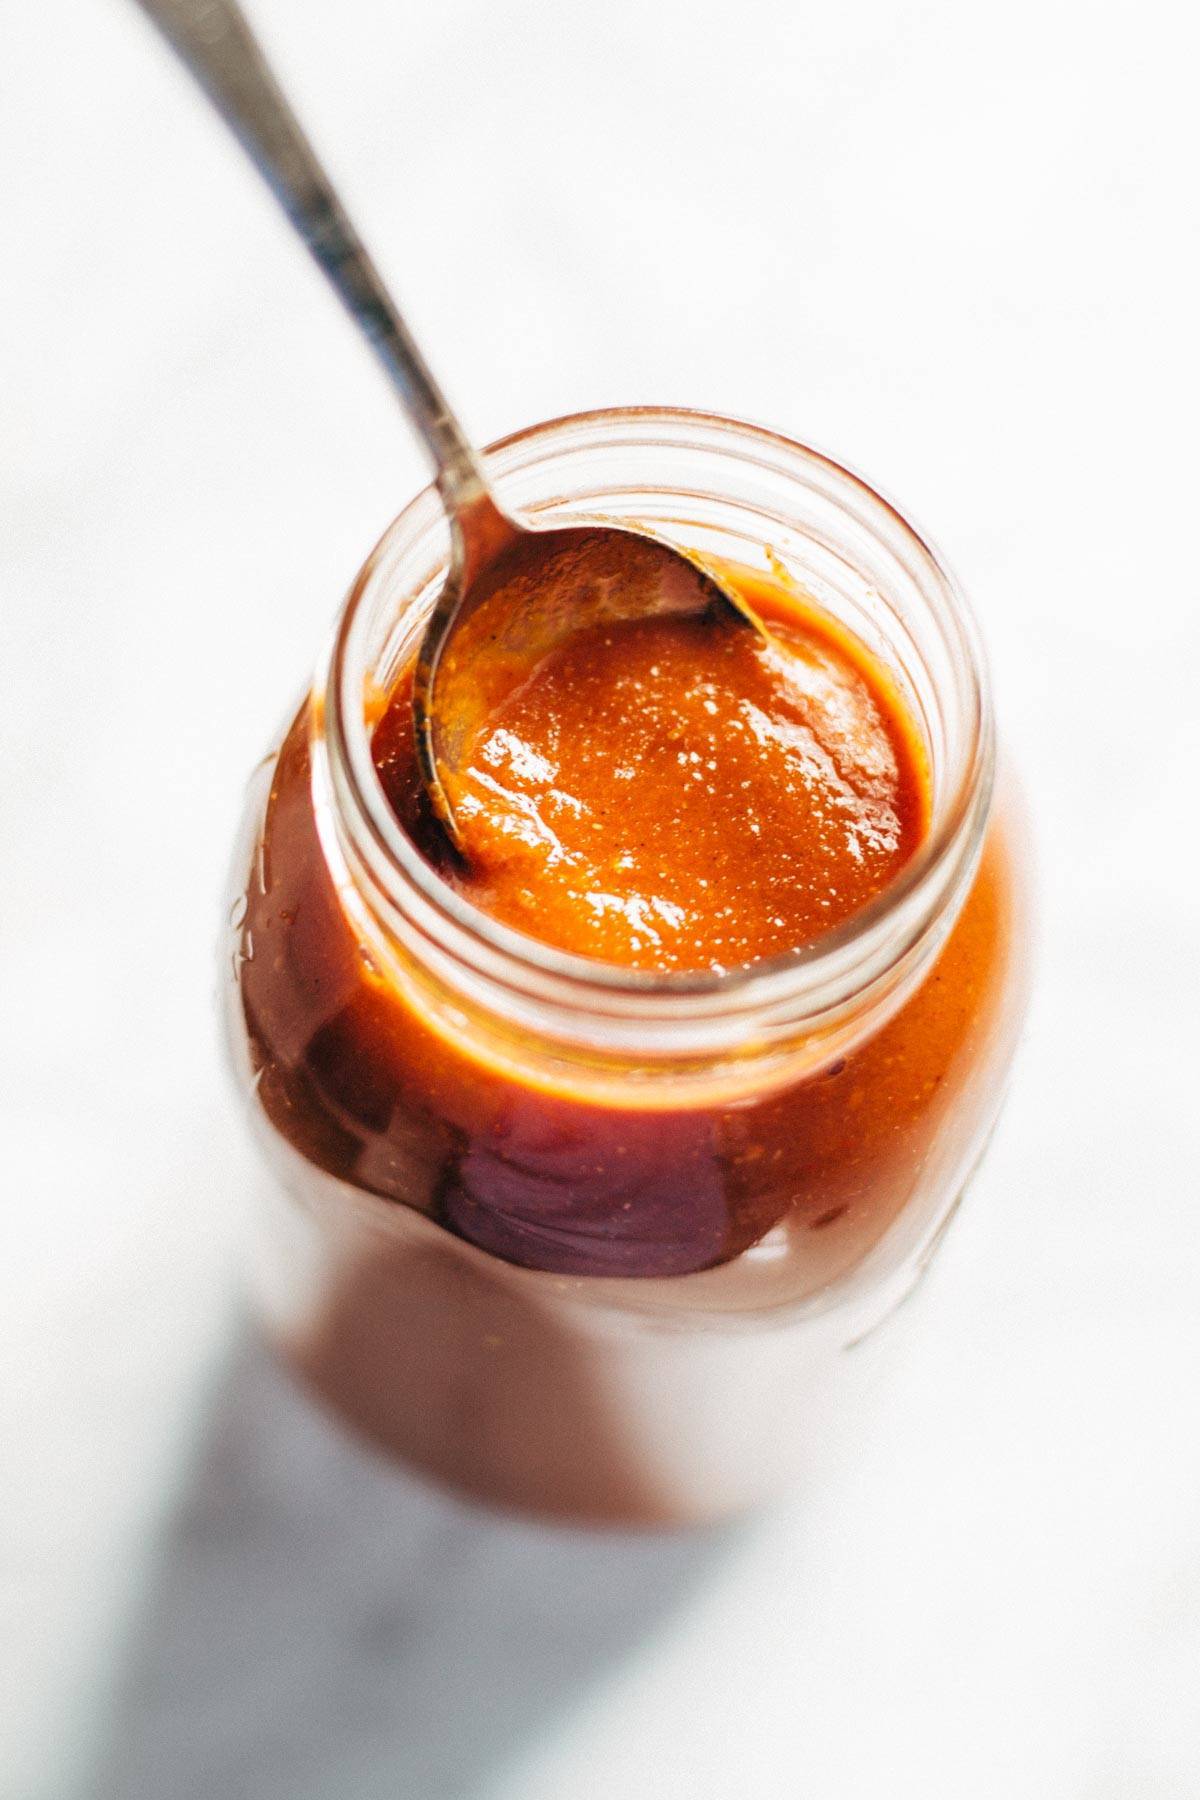 Enchilada sauce in a jar with a spoon.